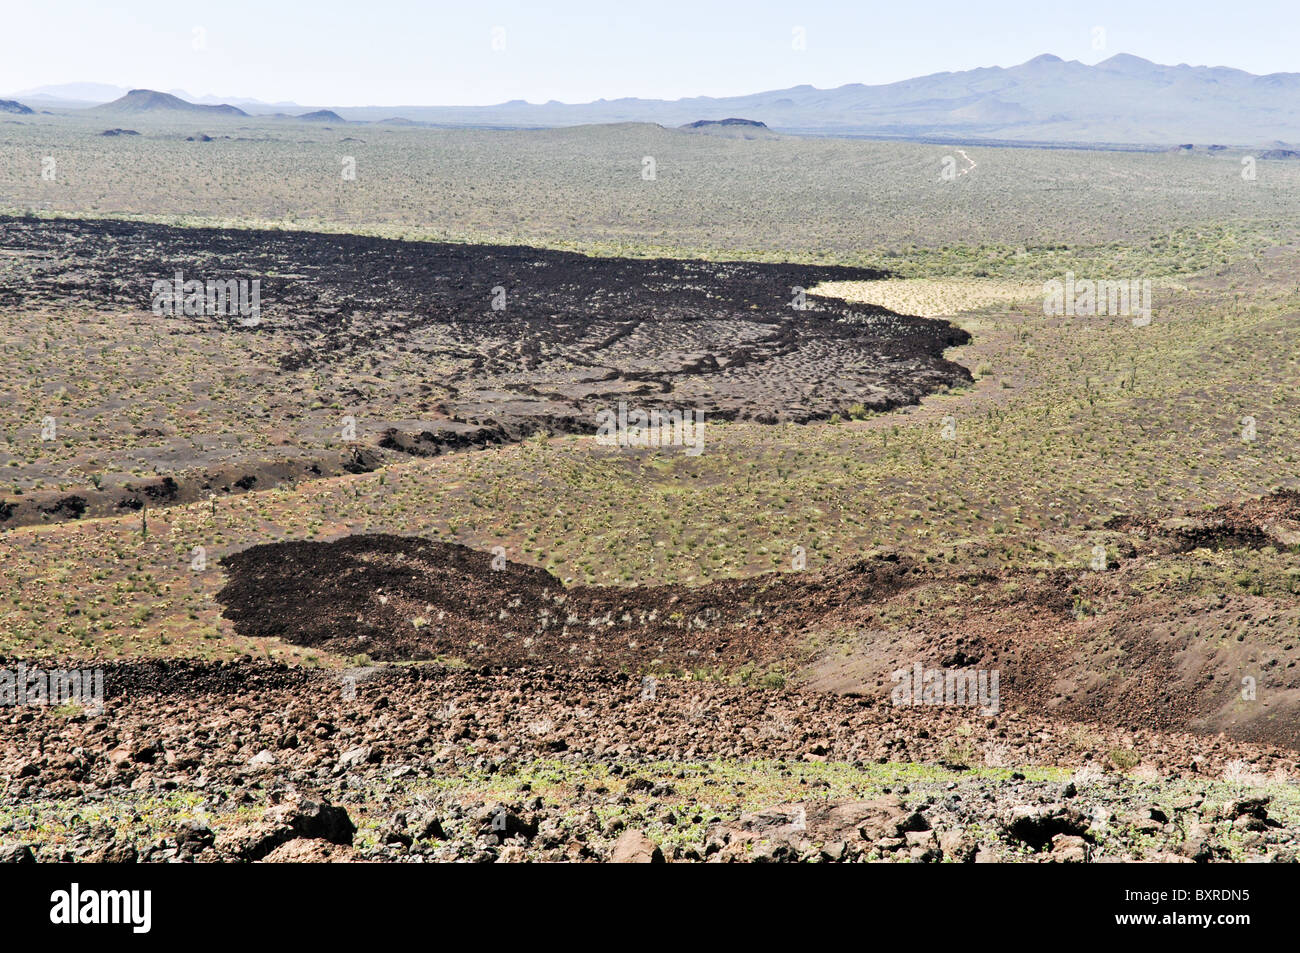 View of lava flow from side of El Tecolote Cinder Cone, El Pinacate Biosphere Reserve, Sonora, Mexico Stock Photo